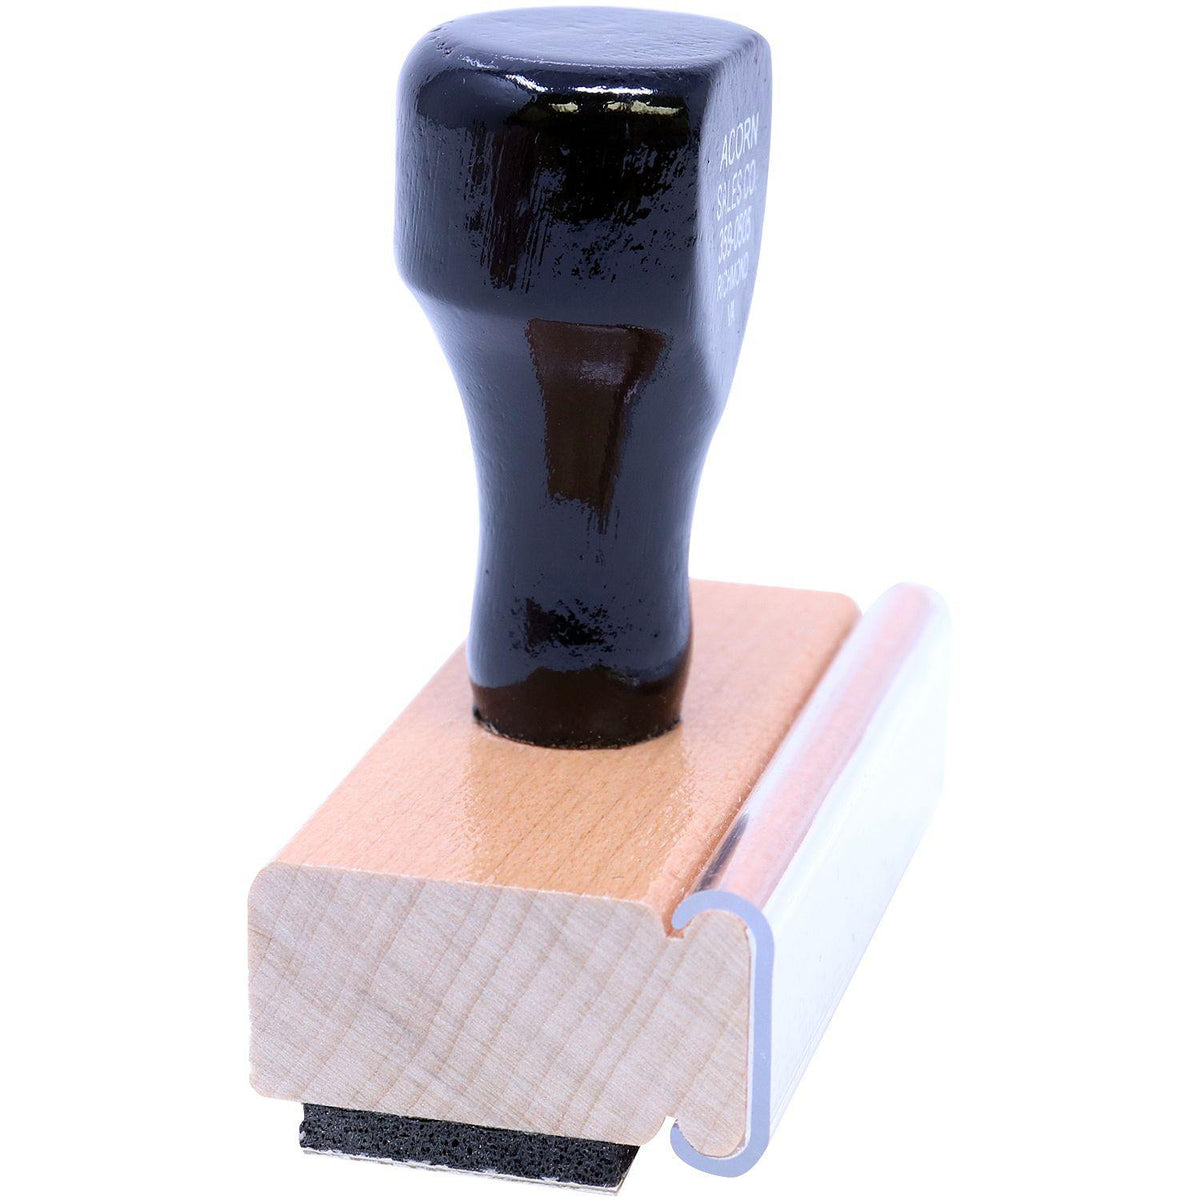 Side View of Large Escrow Account Rubber Stamp at an Angle